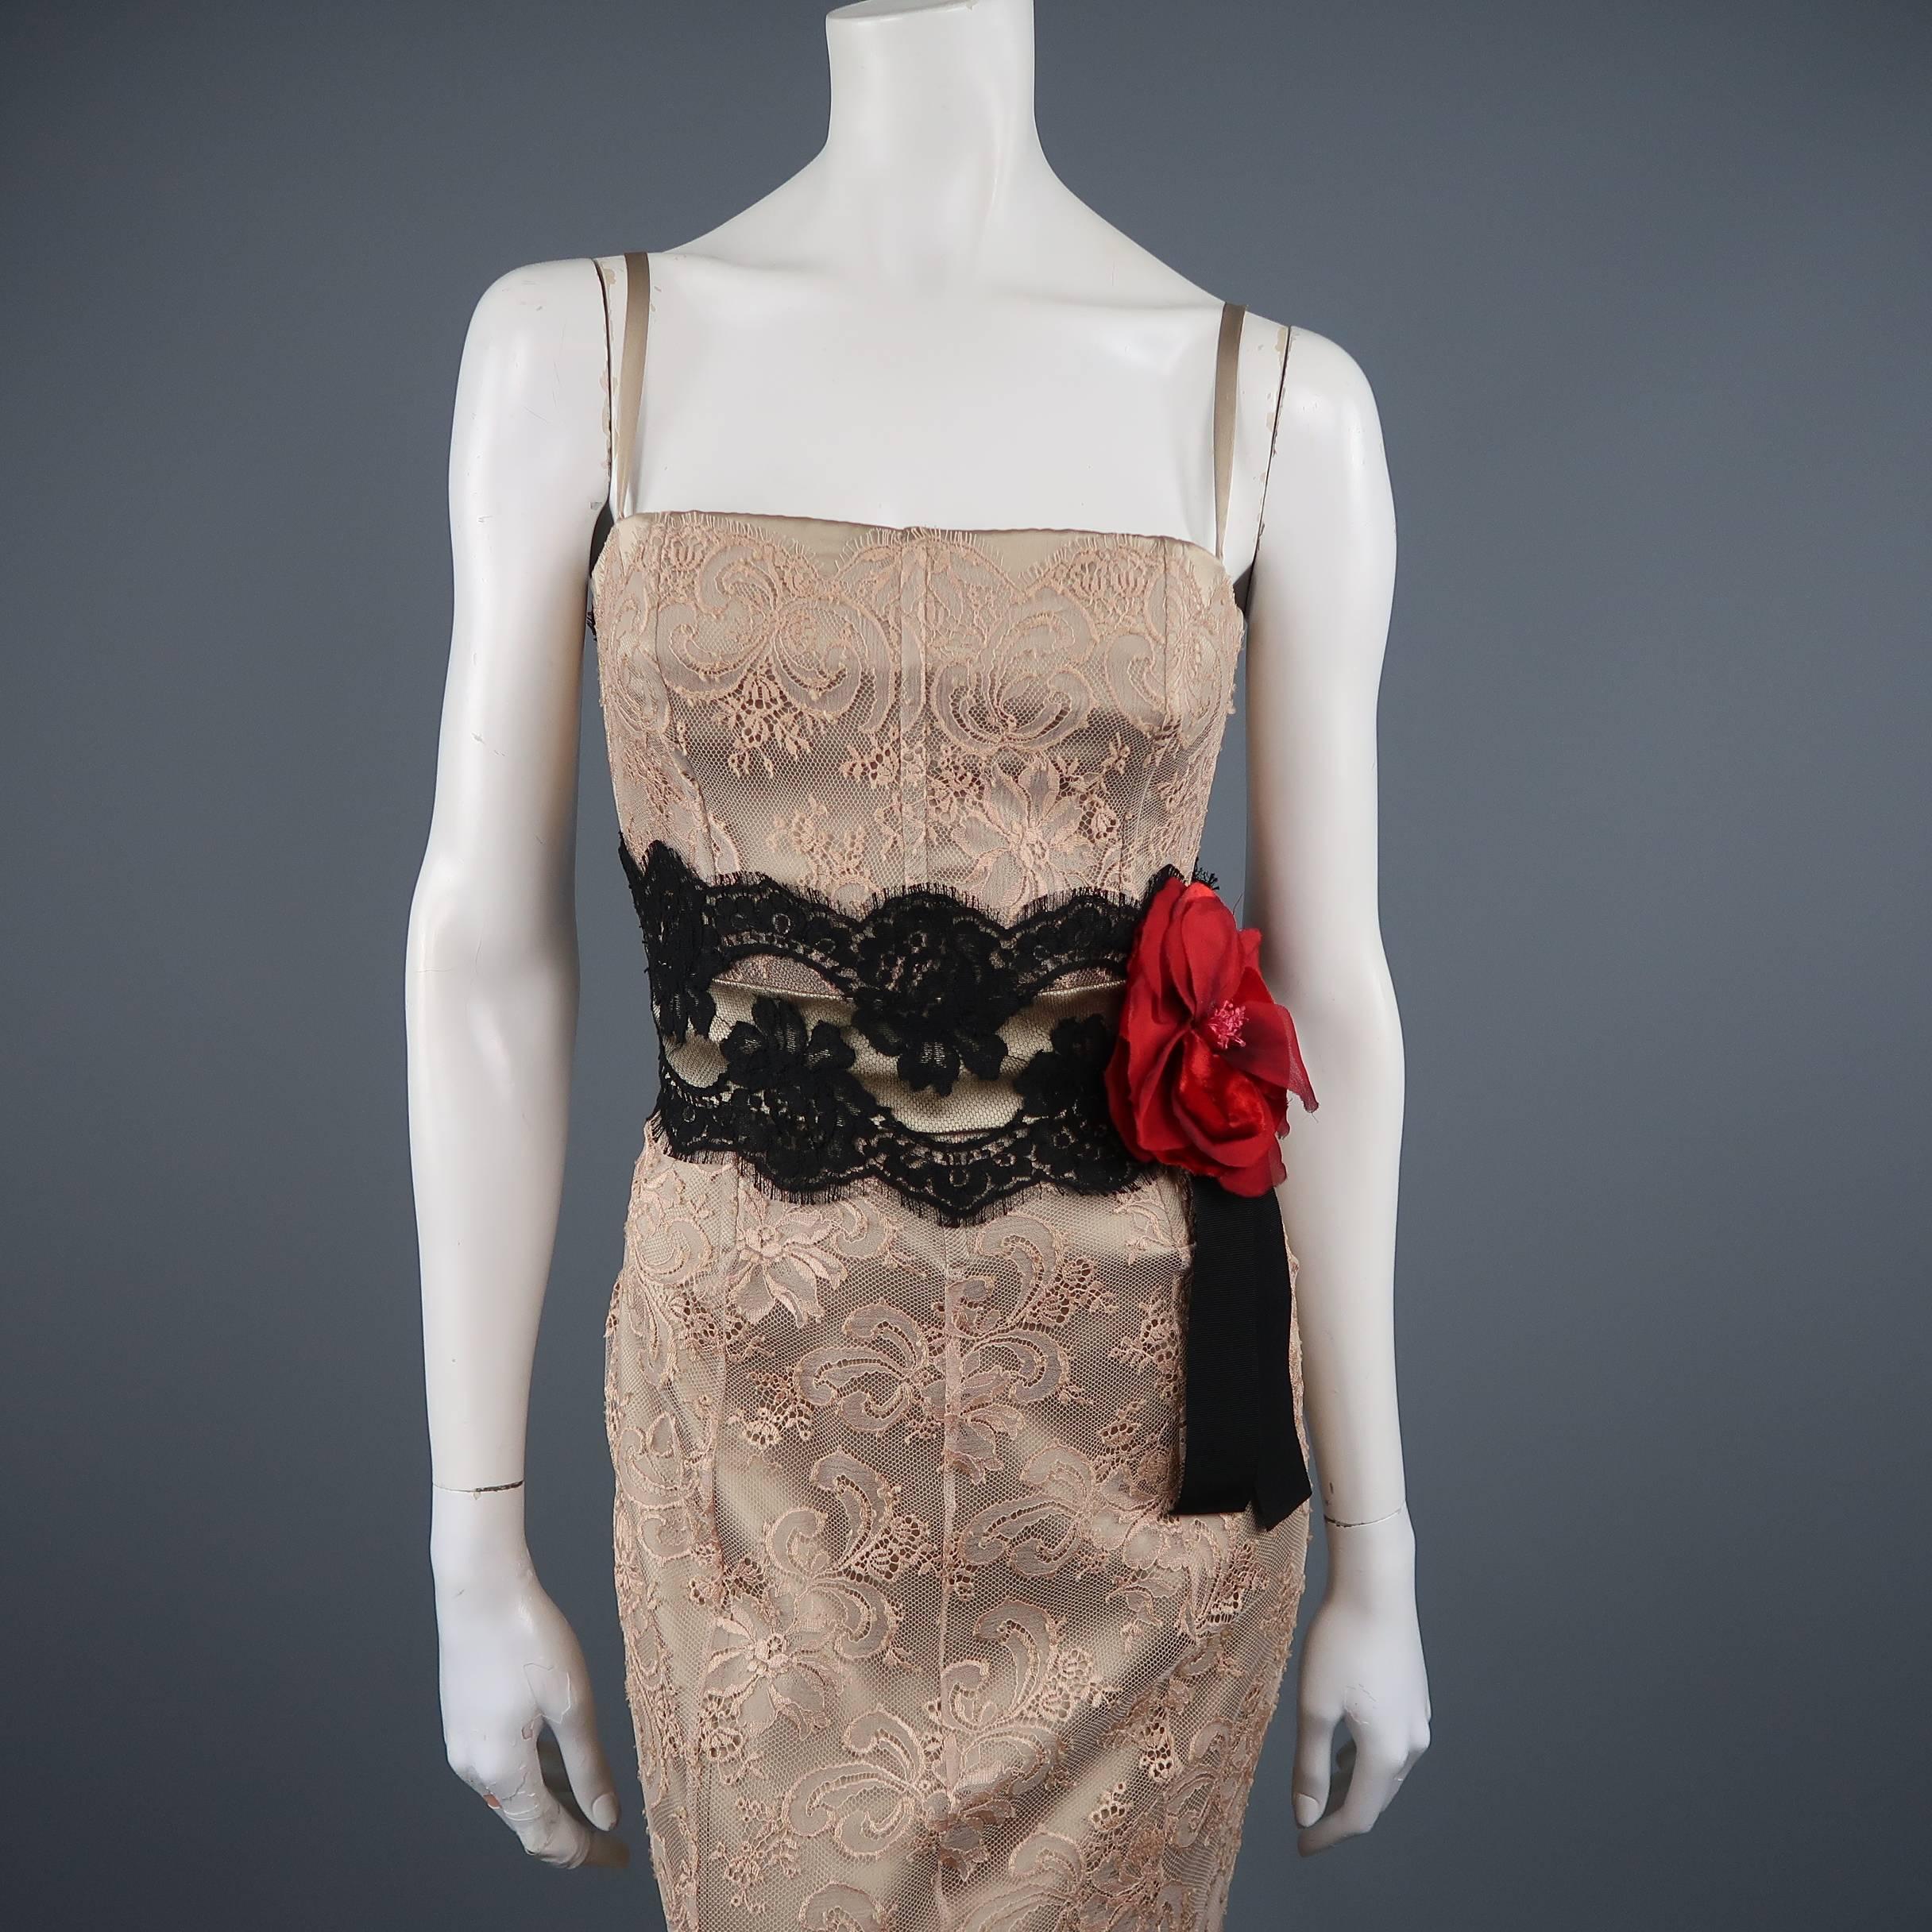 This stunning DOLCE & GABBANA evening gown beige silk satin with a lace overlay and features a boned bustier bodice, thick black lace waistband, and crimson red chiffon and velvet flower applique at waist. Made in Italy.  Retailed: $4500.00
